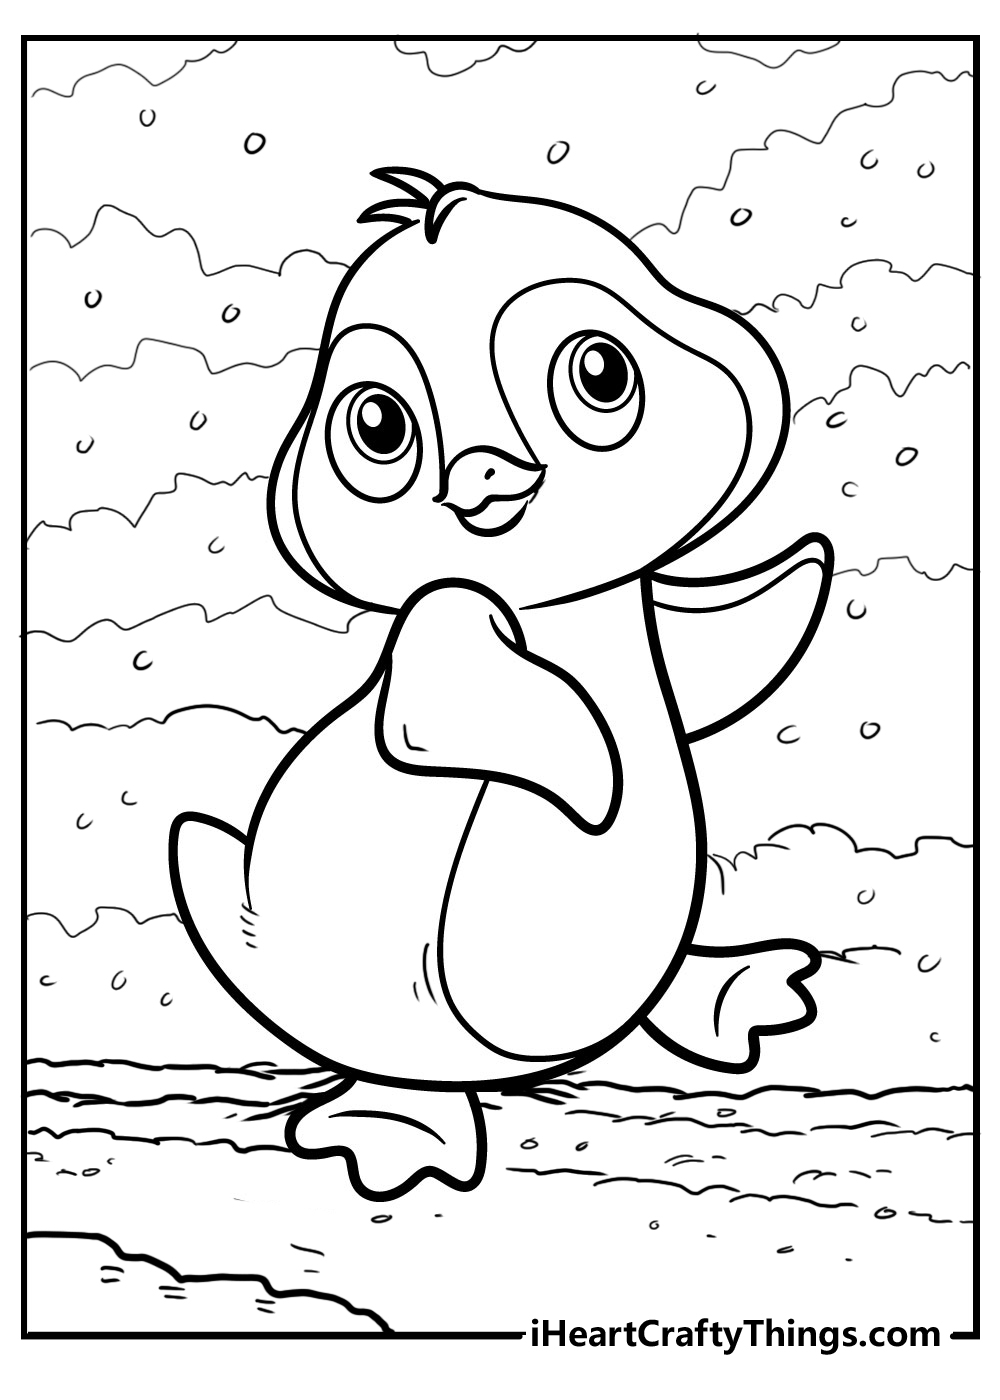 Penguin coloring pages free printables